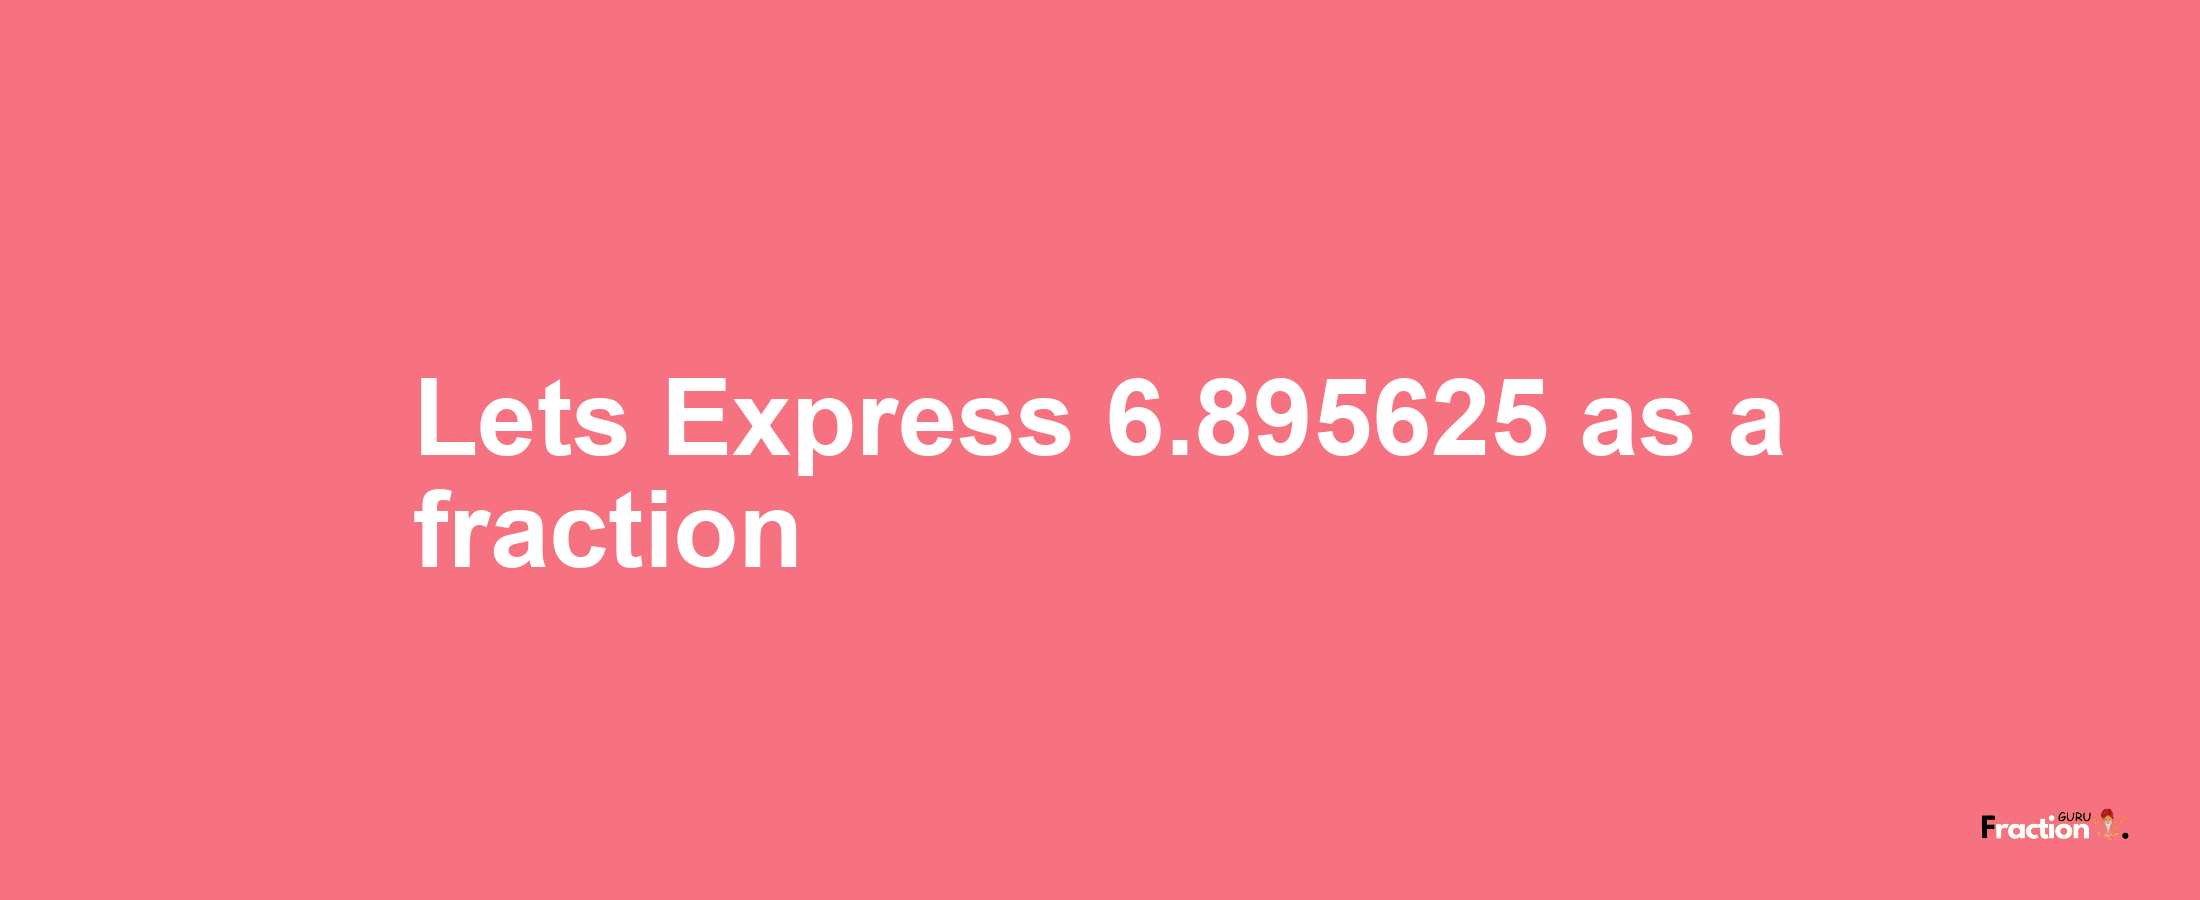 Lets Express 6.895625 as afraction